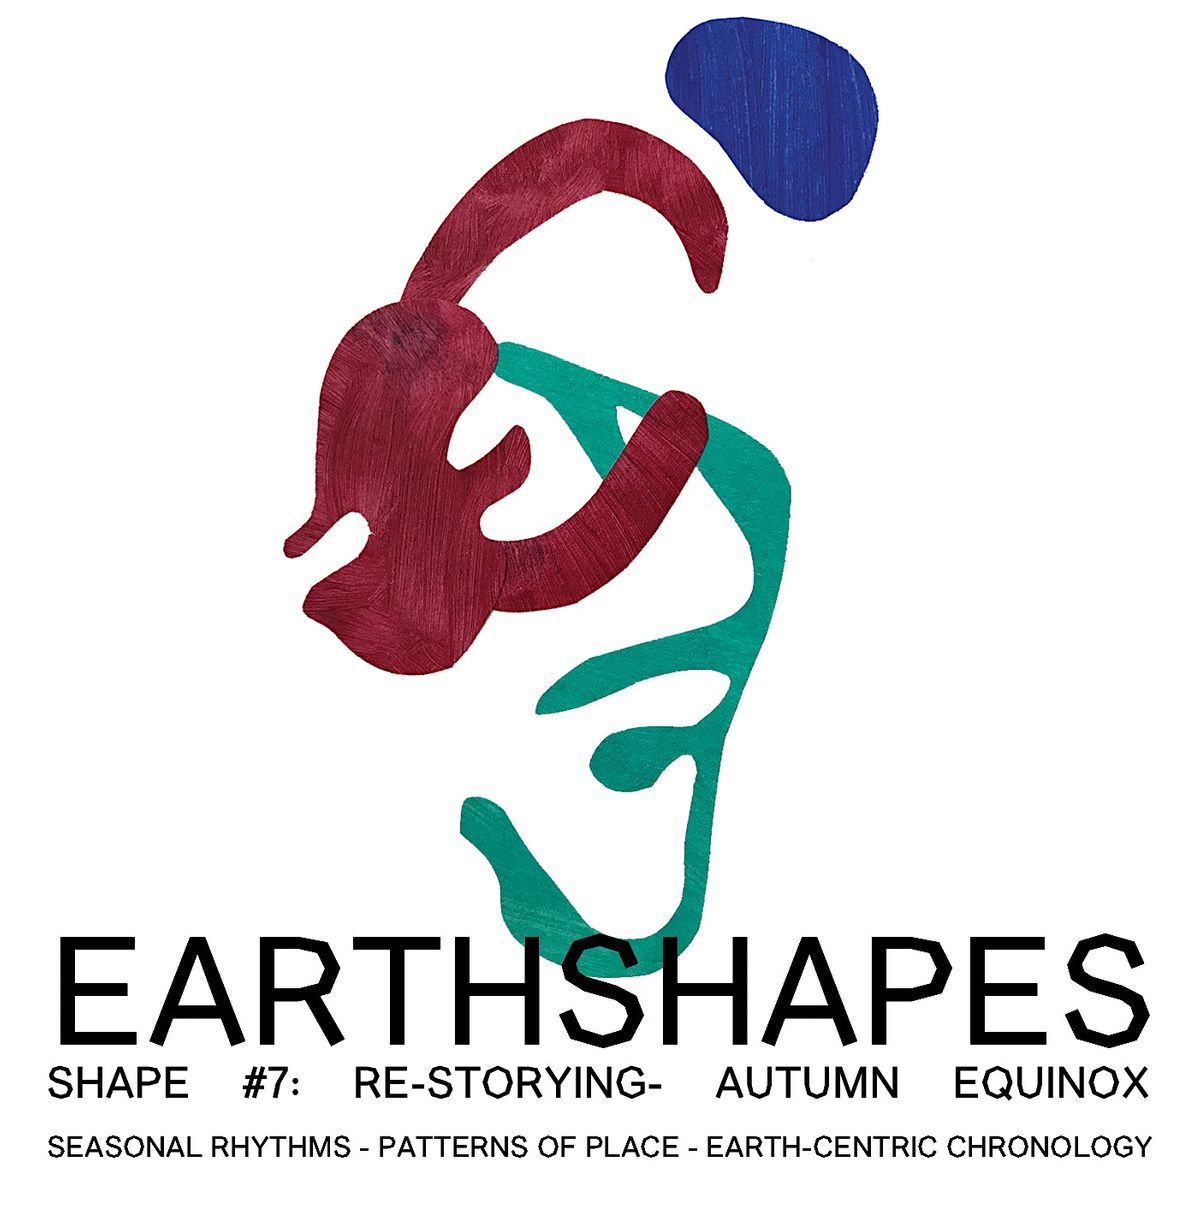 EARTHSHAPES #7 RE-STORYING - AUTUMN EQUINOX - SEPTEMBER